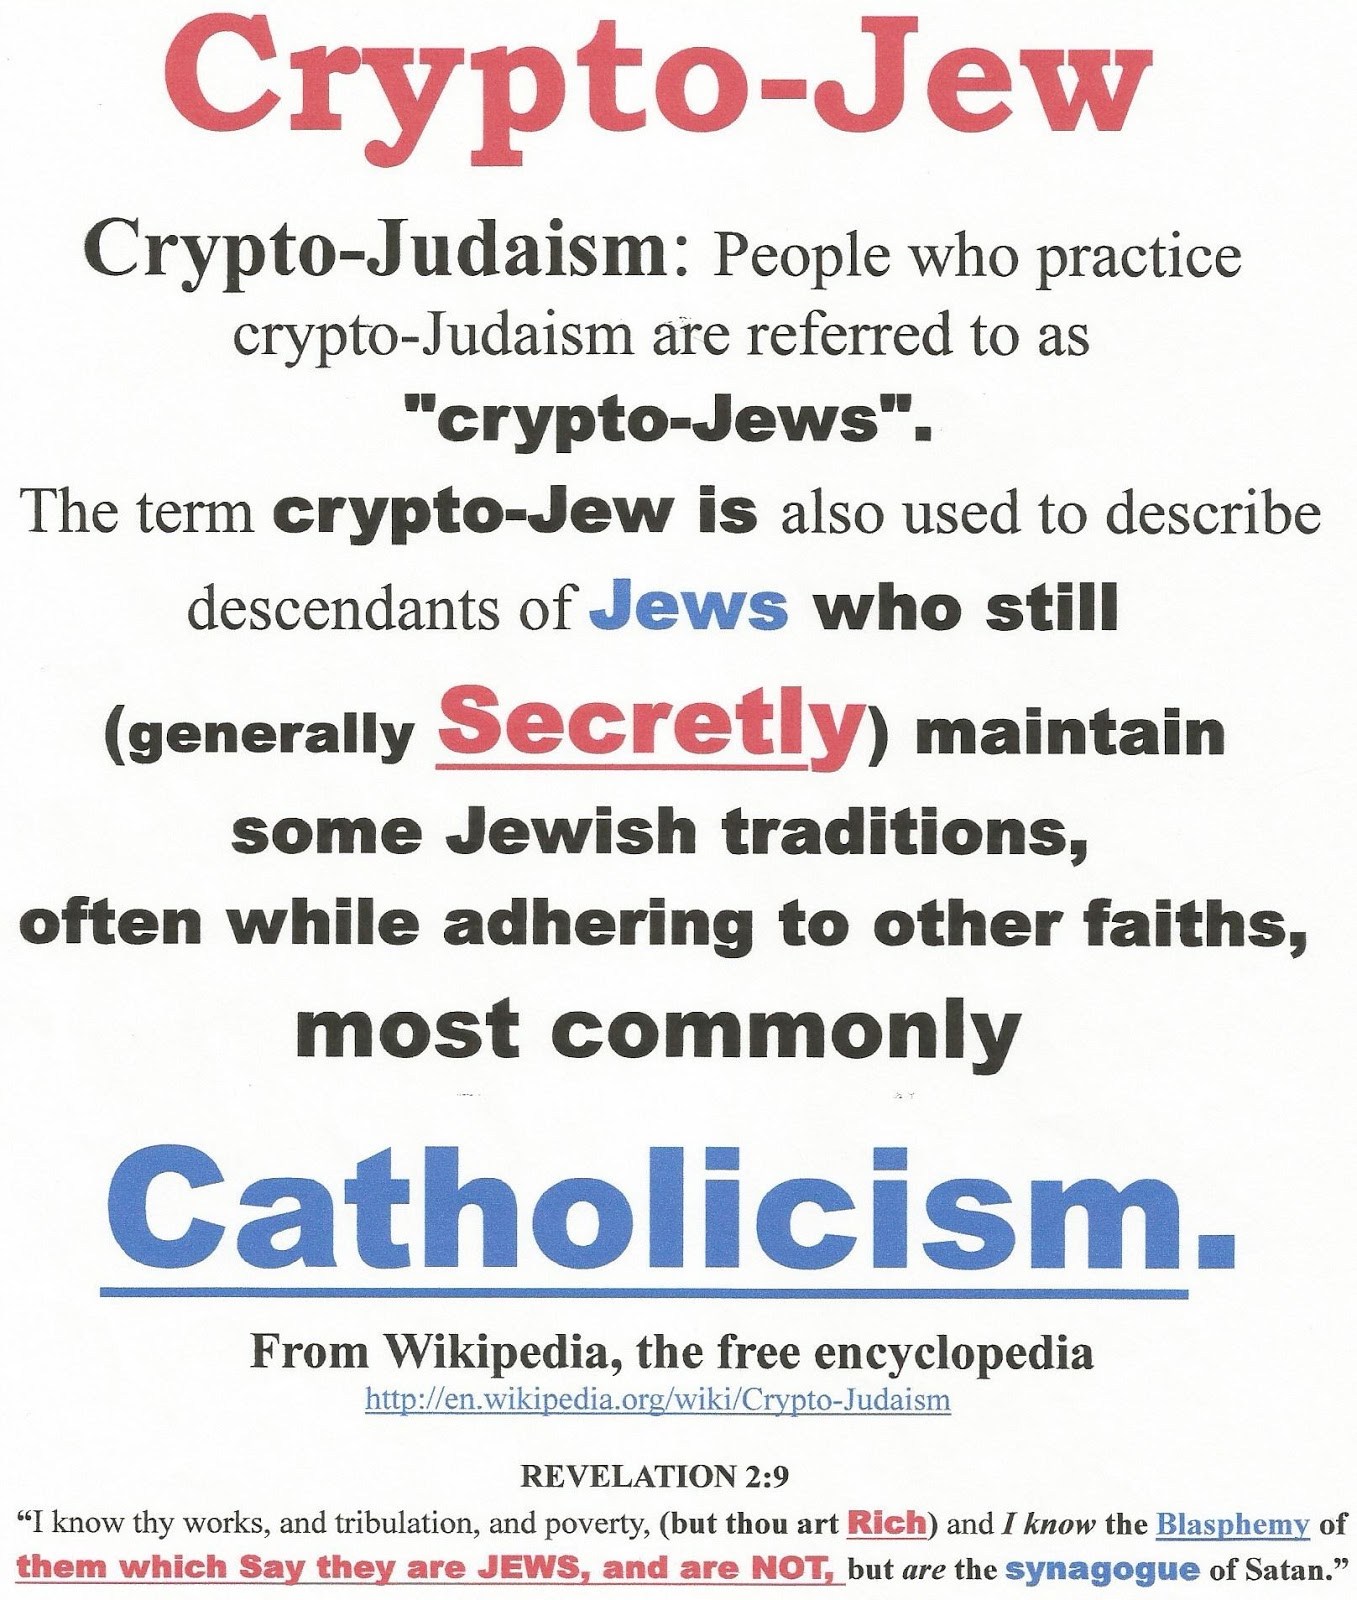 Holy Roman Empire Rules Today: Crypto-Jews: Secret adherence to Judaism